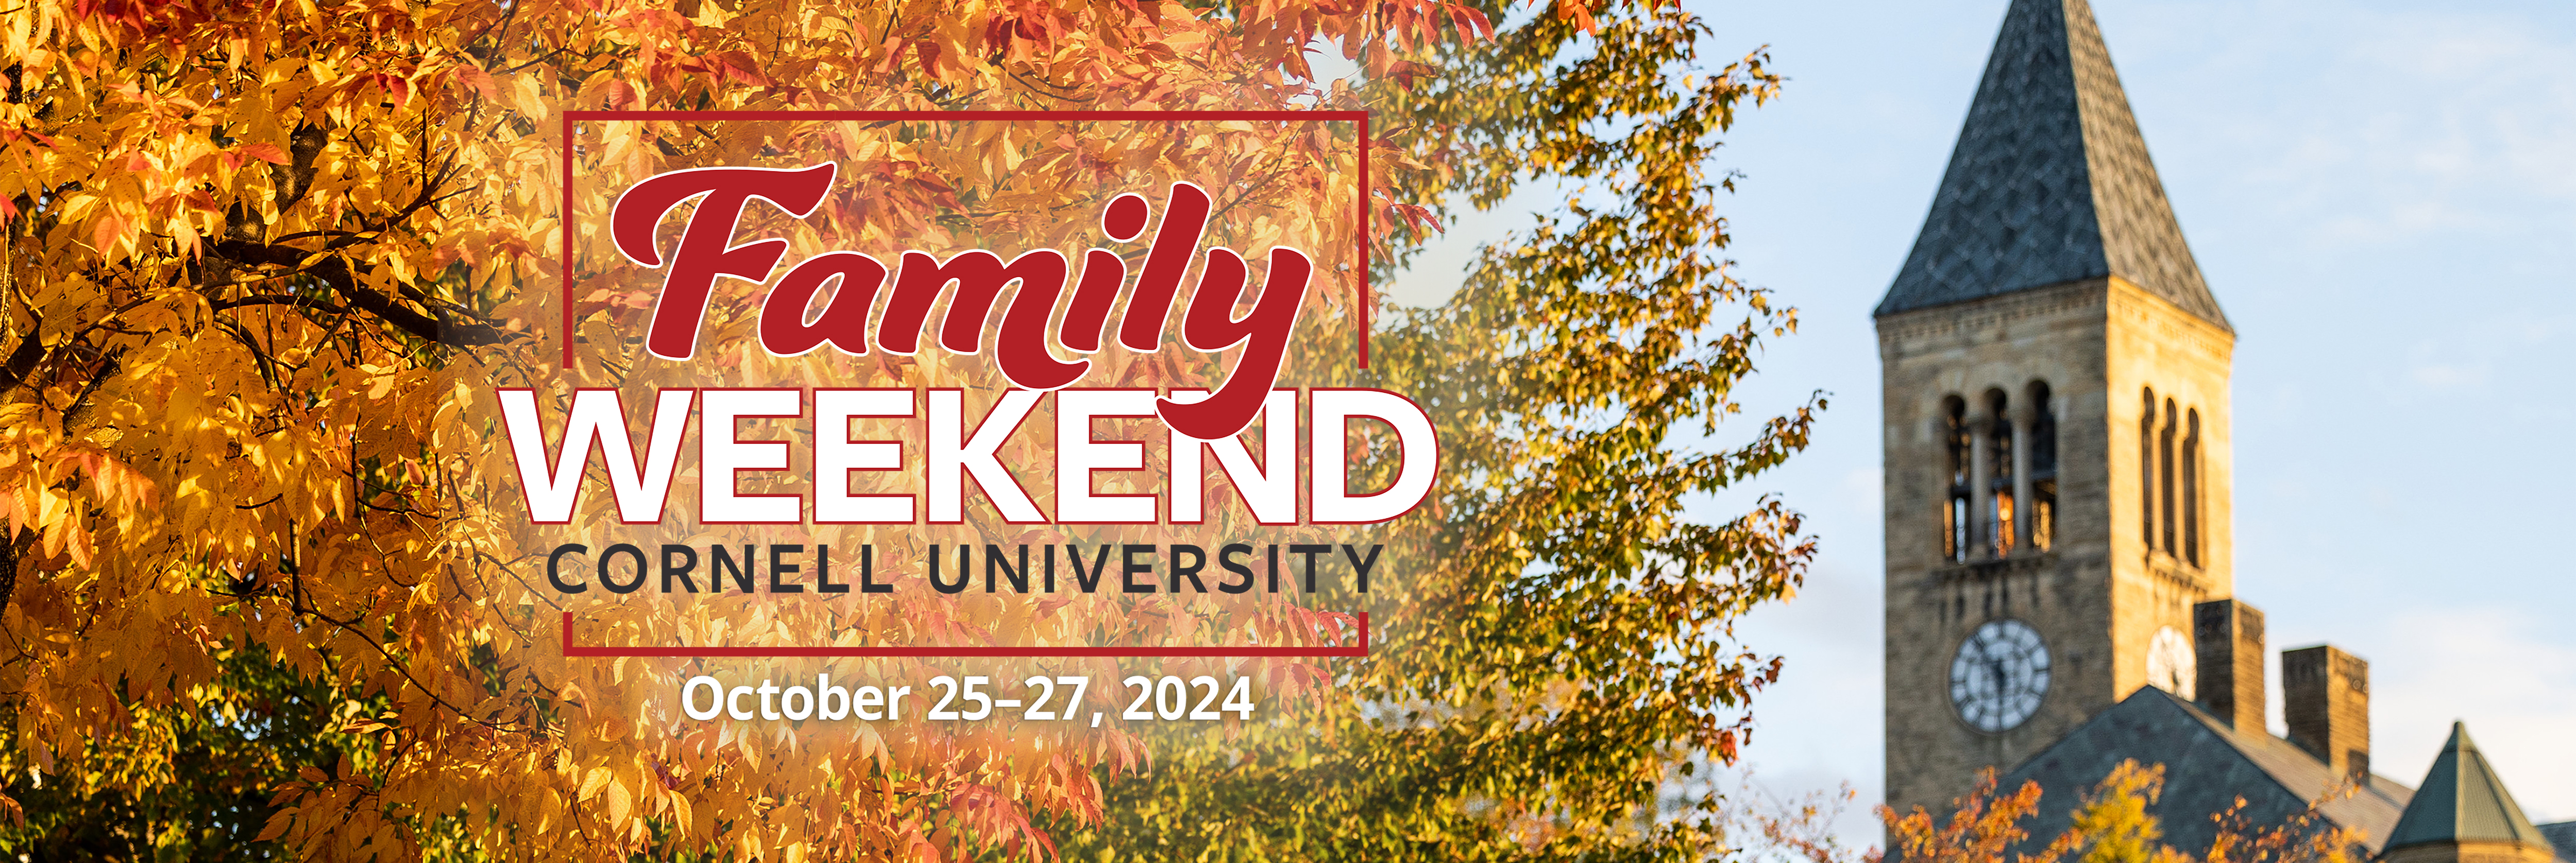 image with trees and belltower, text is Family Weekend October 25-27, 2024